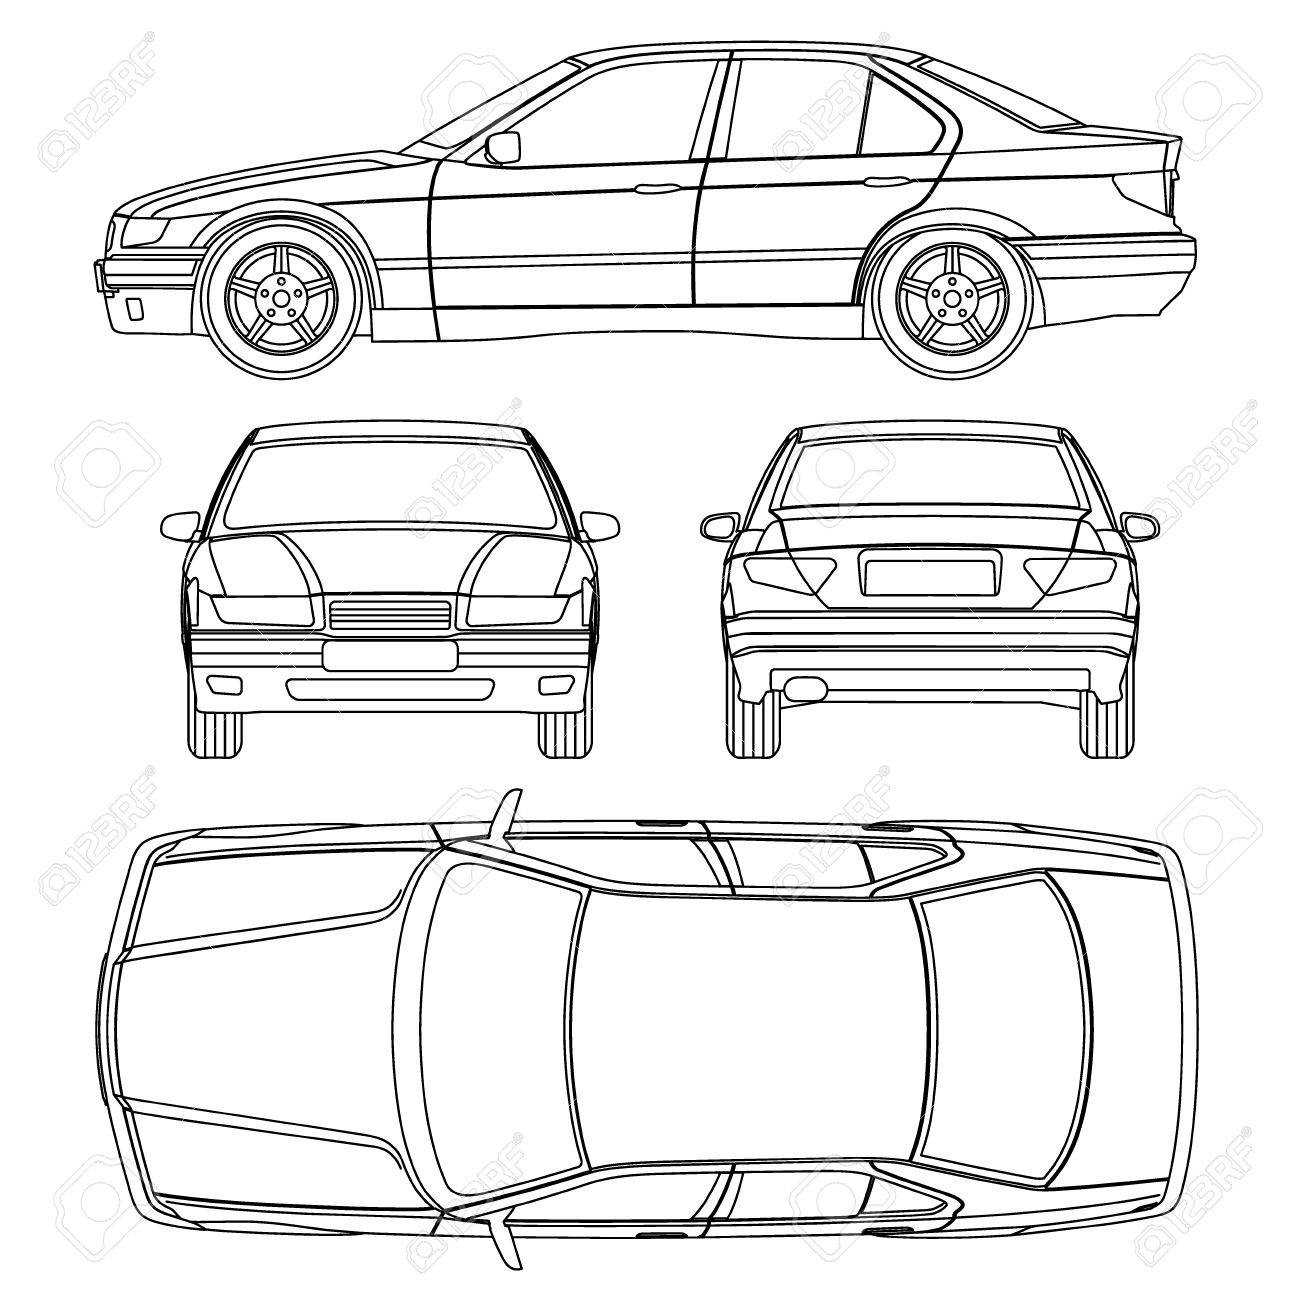 Car Line Draw Insurance Damage, Condition Report Form Throughout Car Damage Report Template